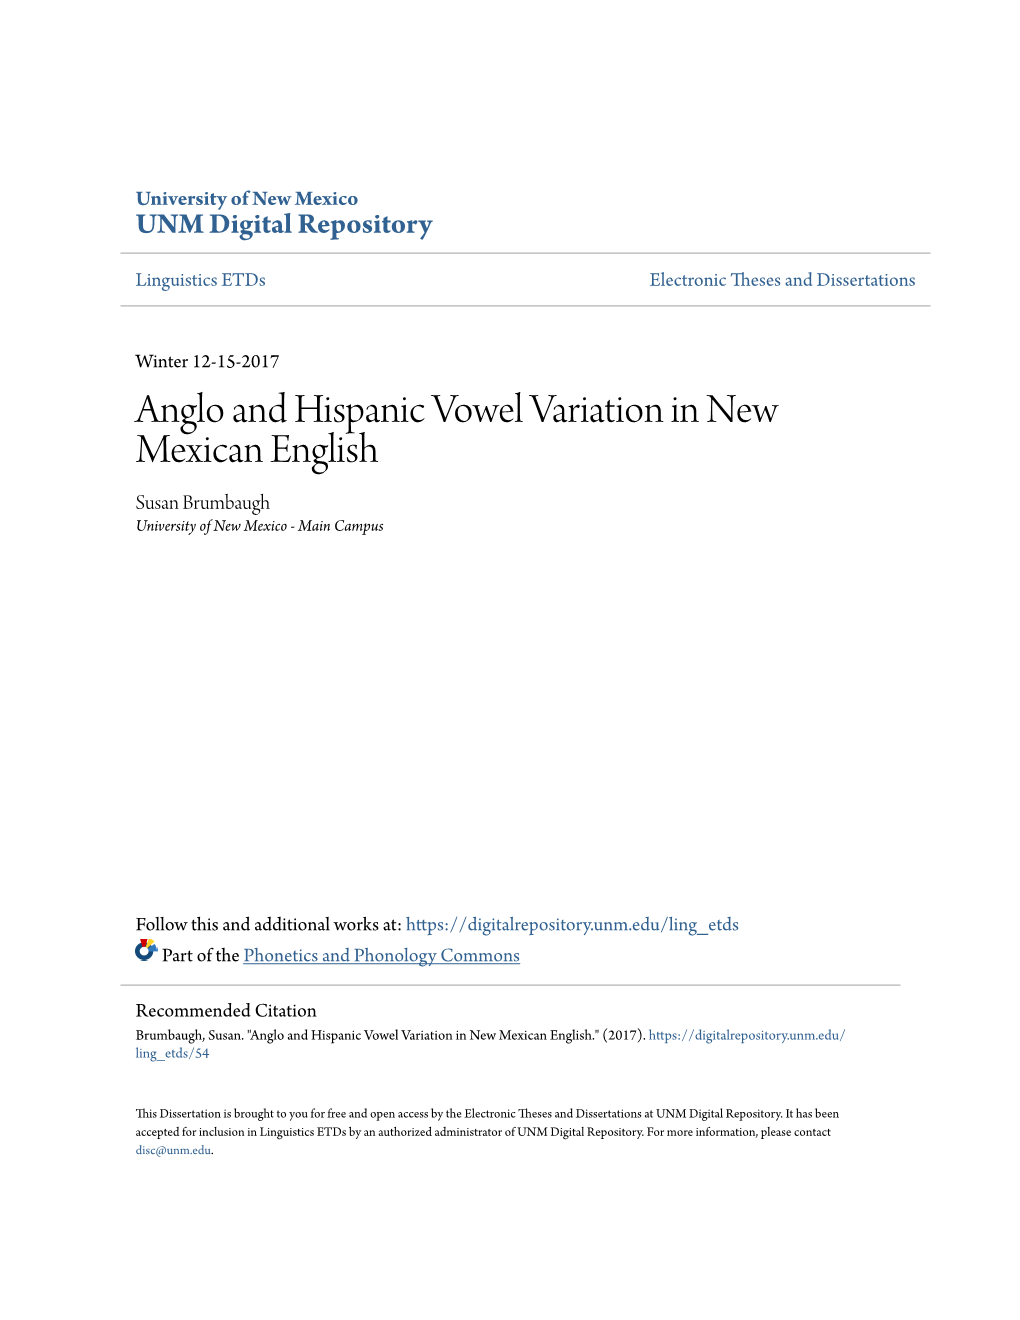 Anglo and Hispanic Vowel Variation in New Mexican English Susan Brumbaugh University of New Mexico - Main Campus